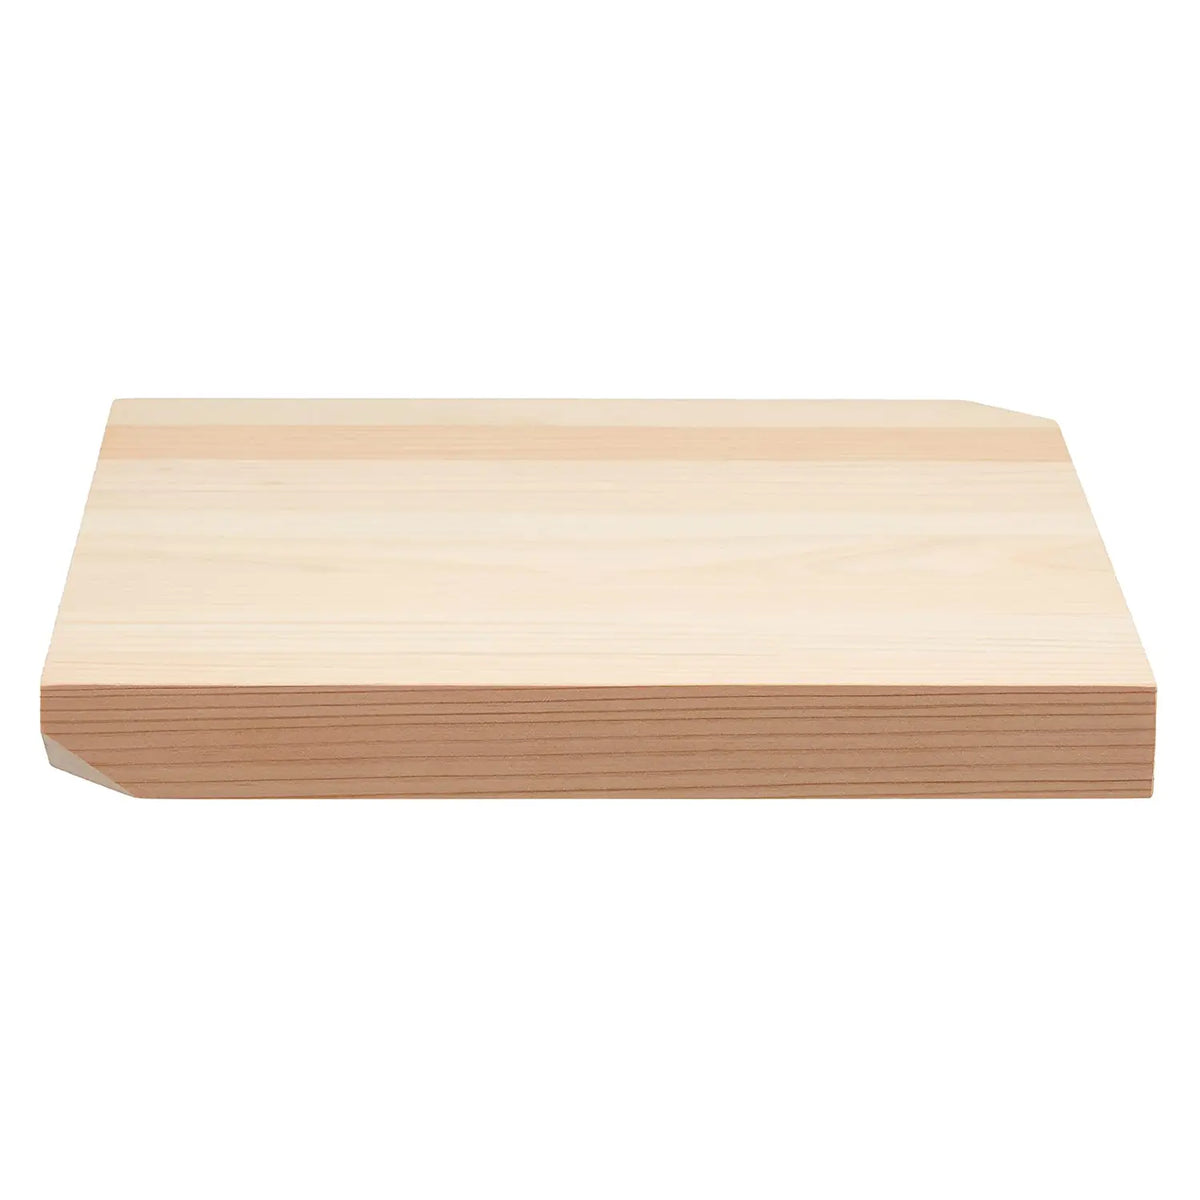 Yamacoh Kiso Hinoki Cypress Wooden Cutting Board with a Wooden Box